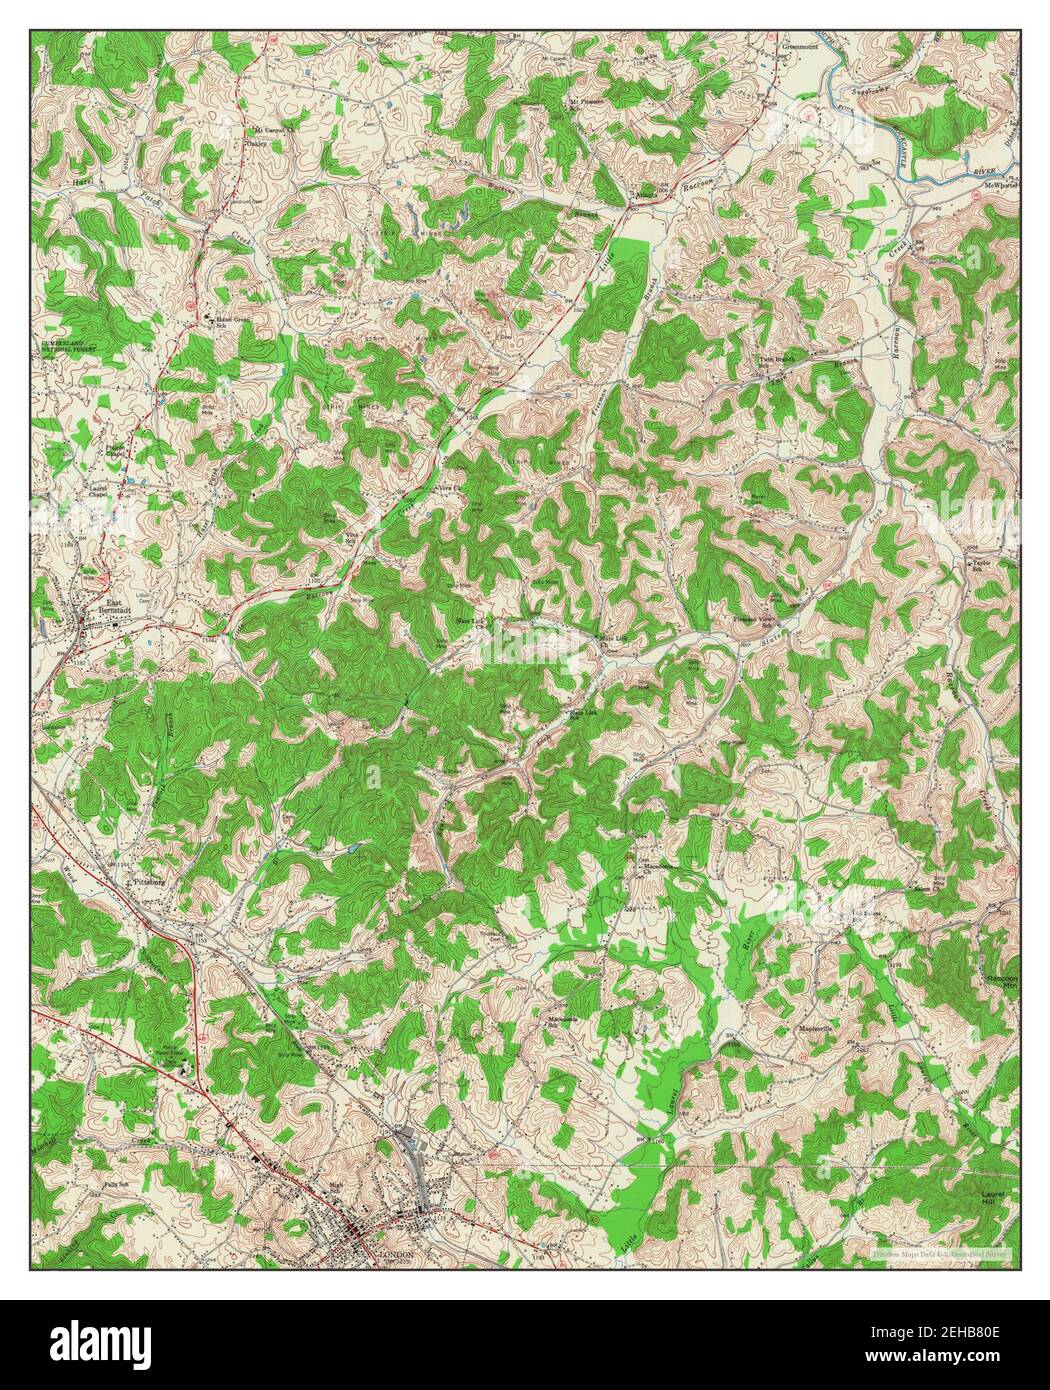 London, Kentucky, map 1952, 1:24000, United States of America by Timeless Maps, data U.S. Geological Survey Stock Photo